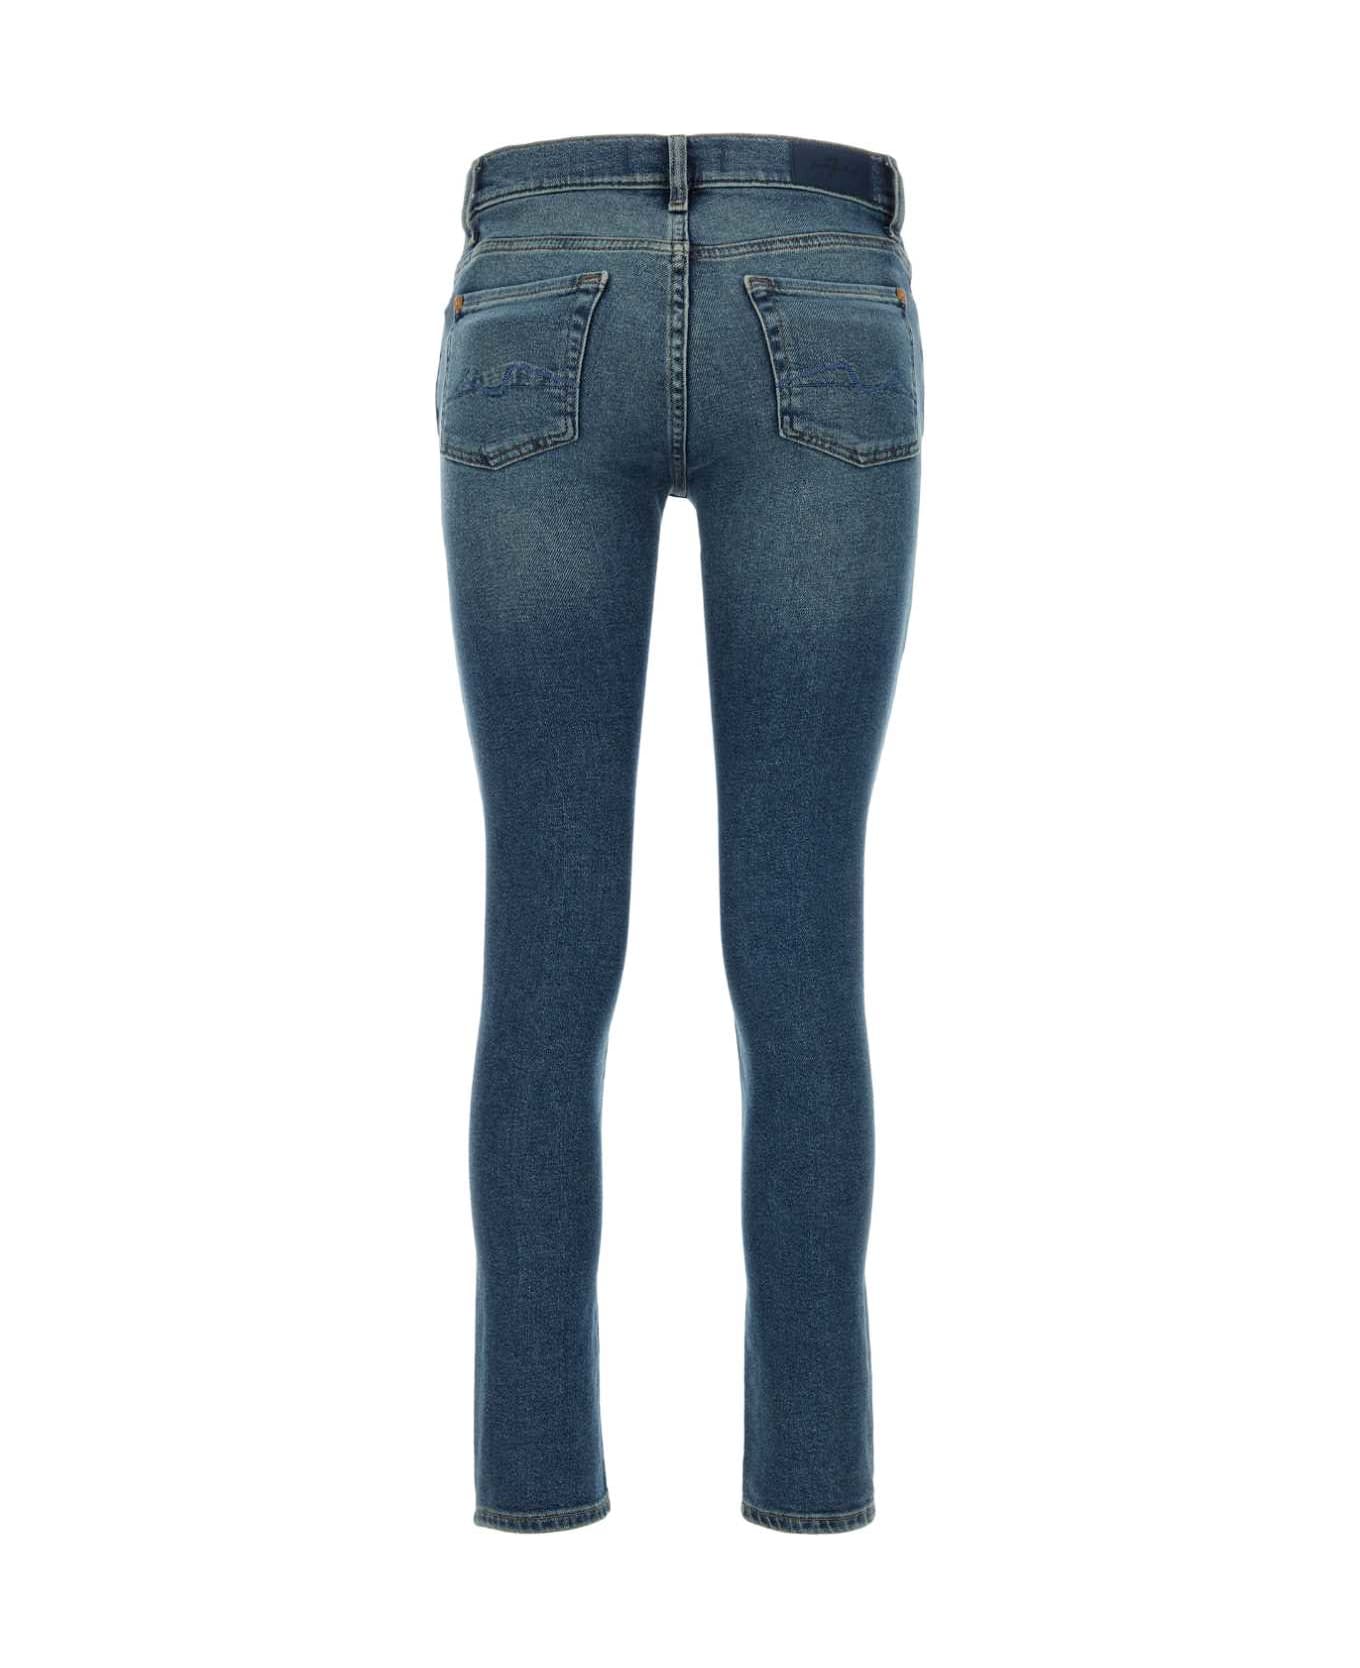 7 For All Mankind Stretch Denim Roxanne Jeans - BLUSCURO デニム